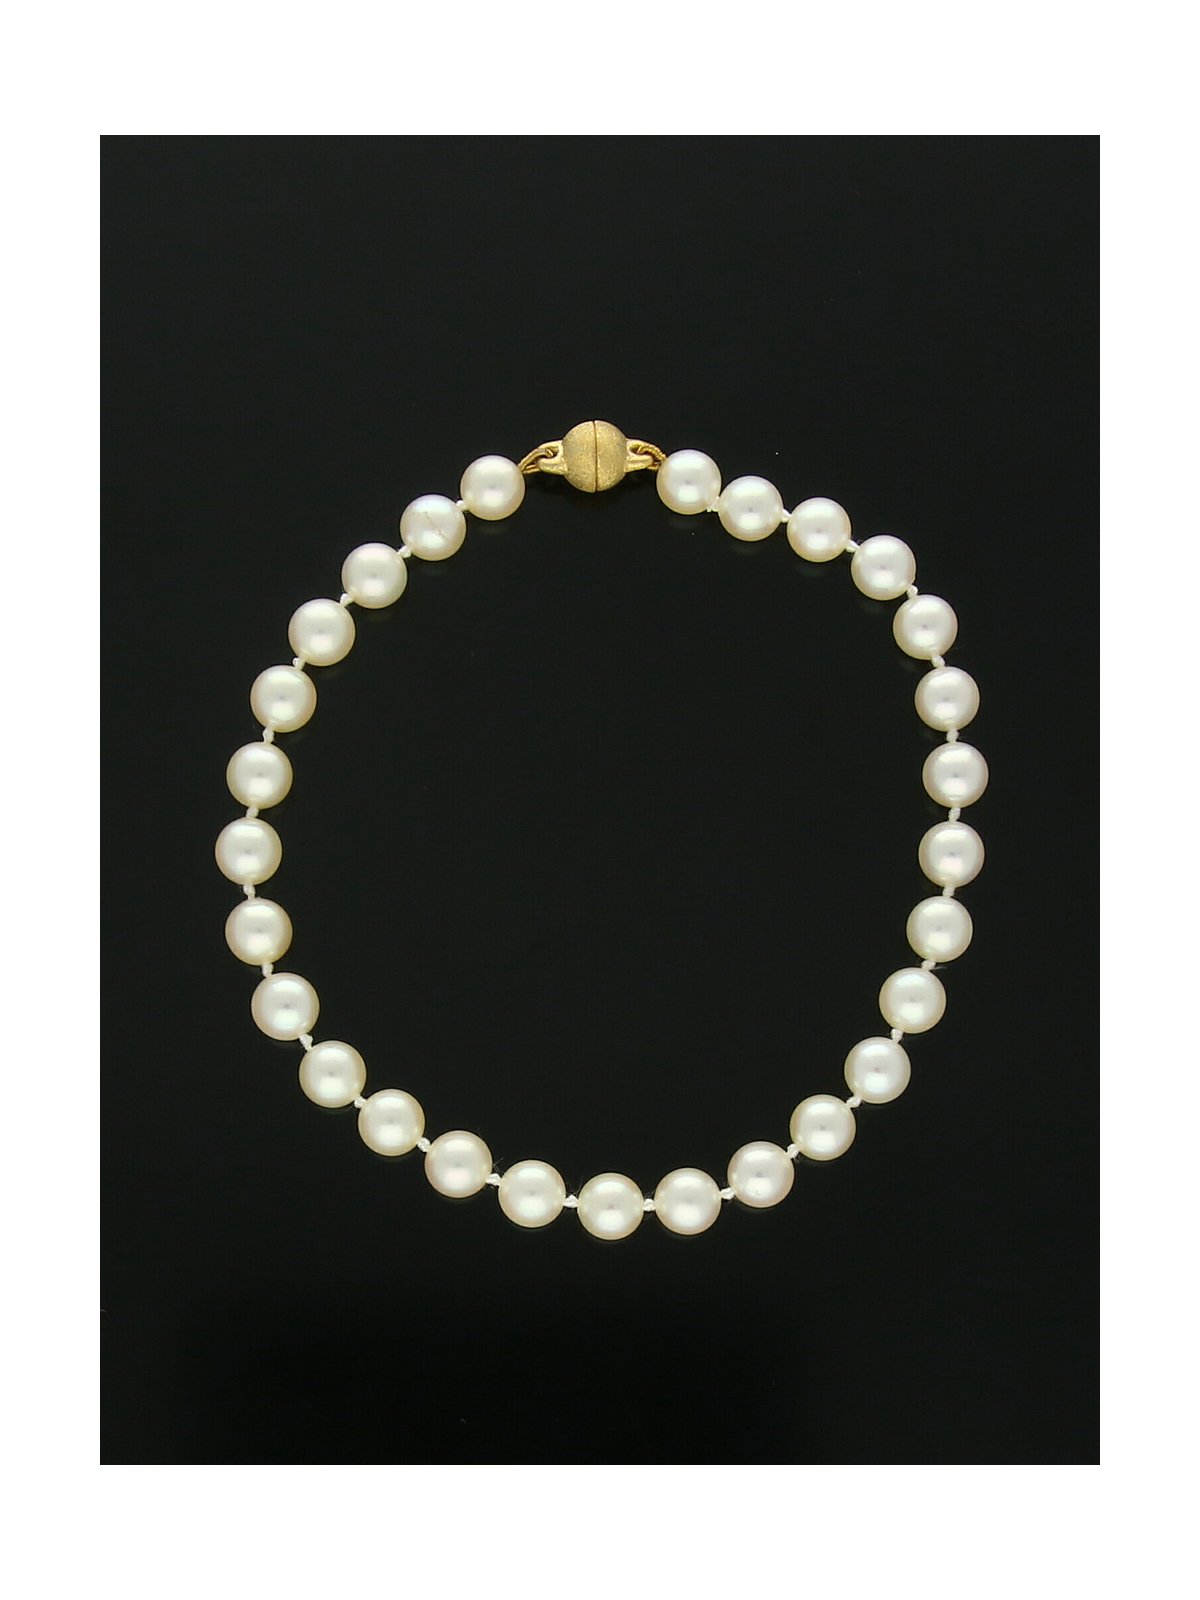 White Cultured Pearl Bracelet with Gold Magnetic Ball Clasp